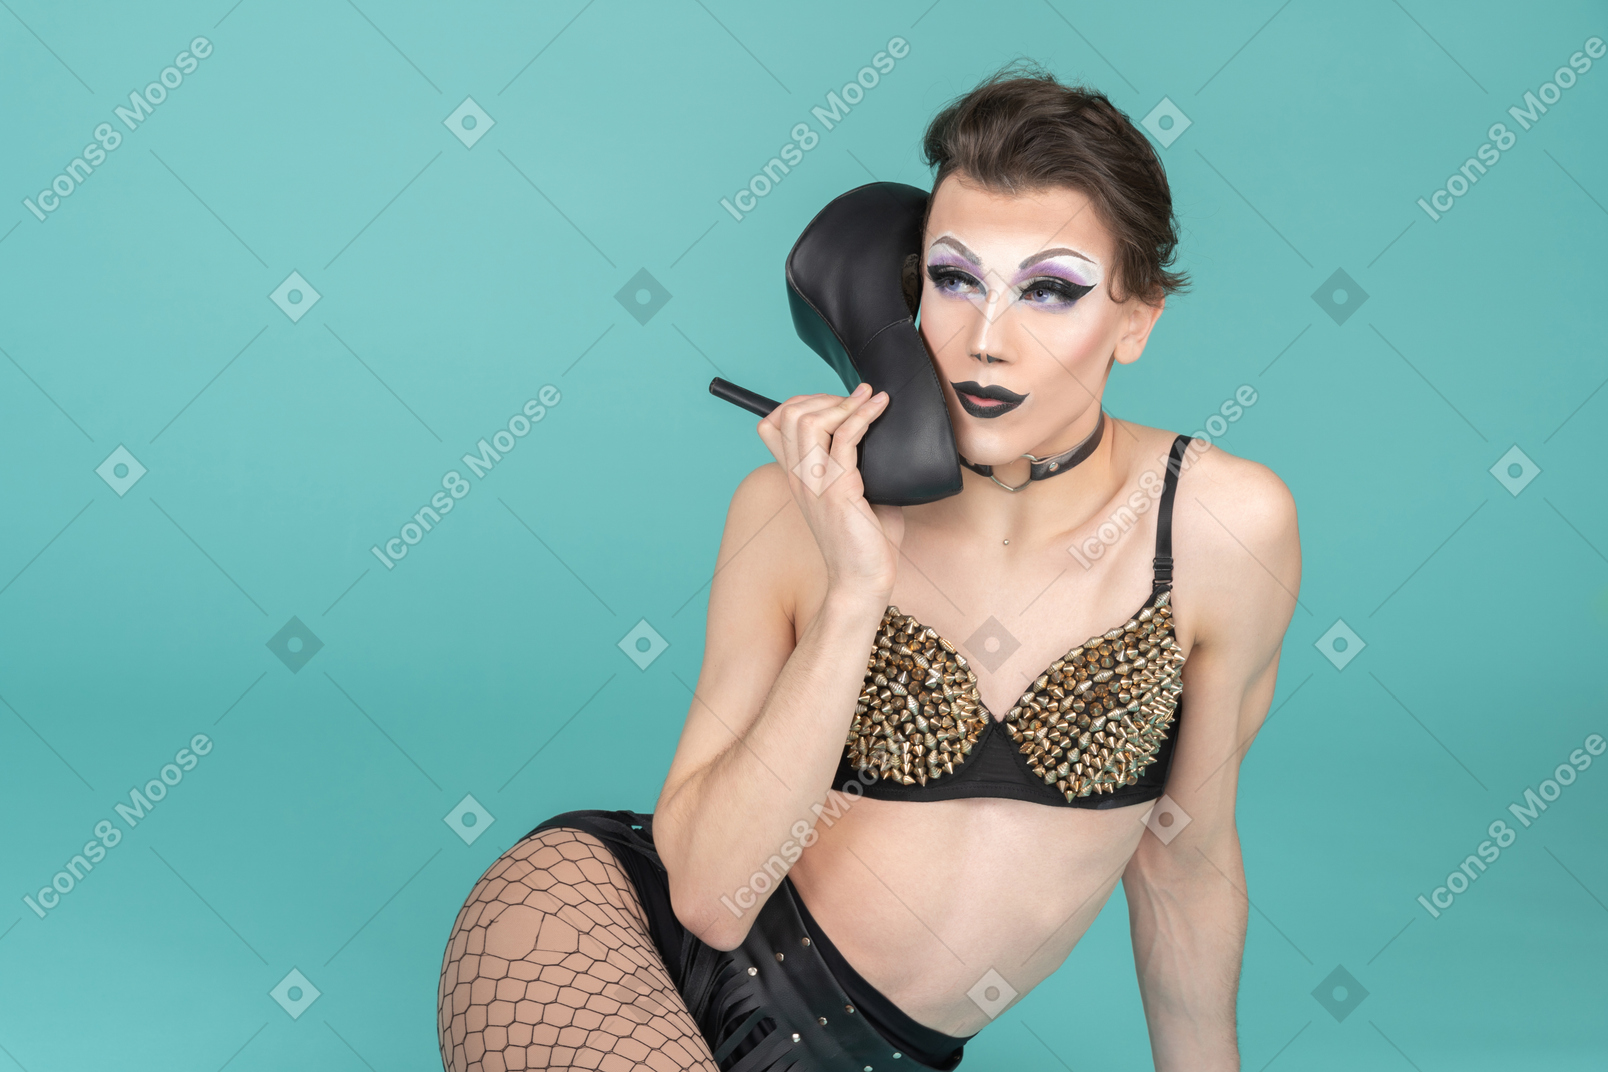 Drag queen in studded bra using shoes as phone